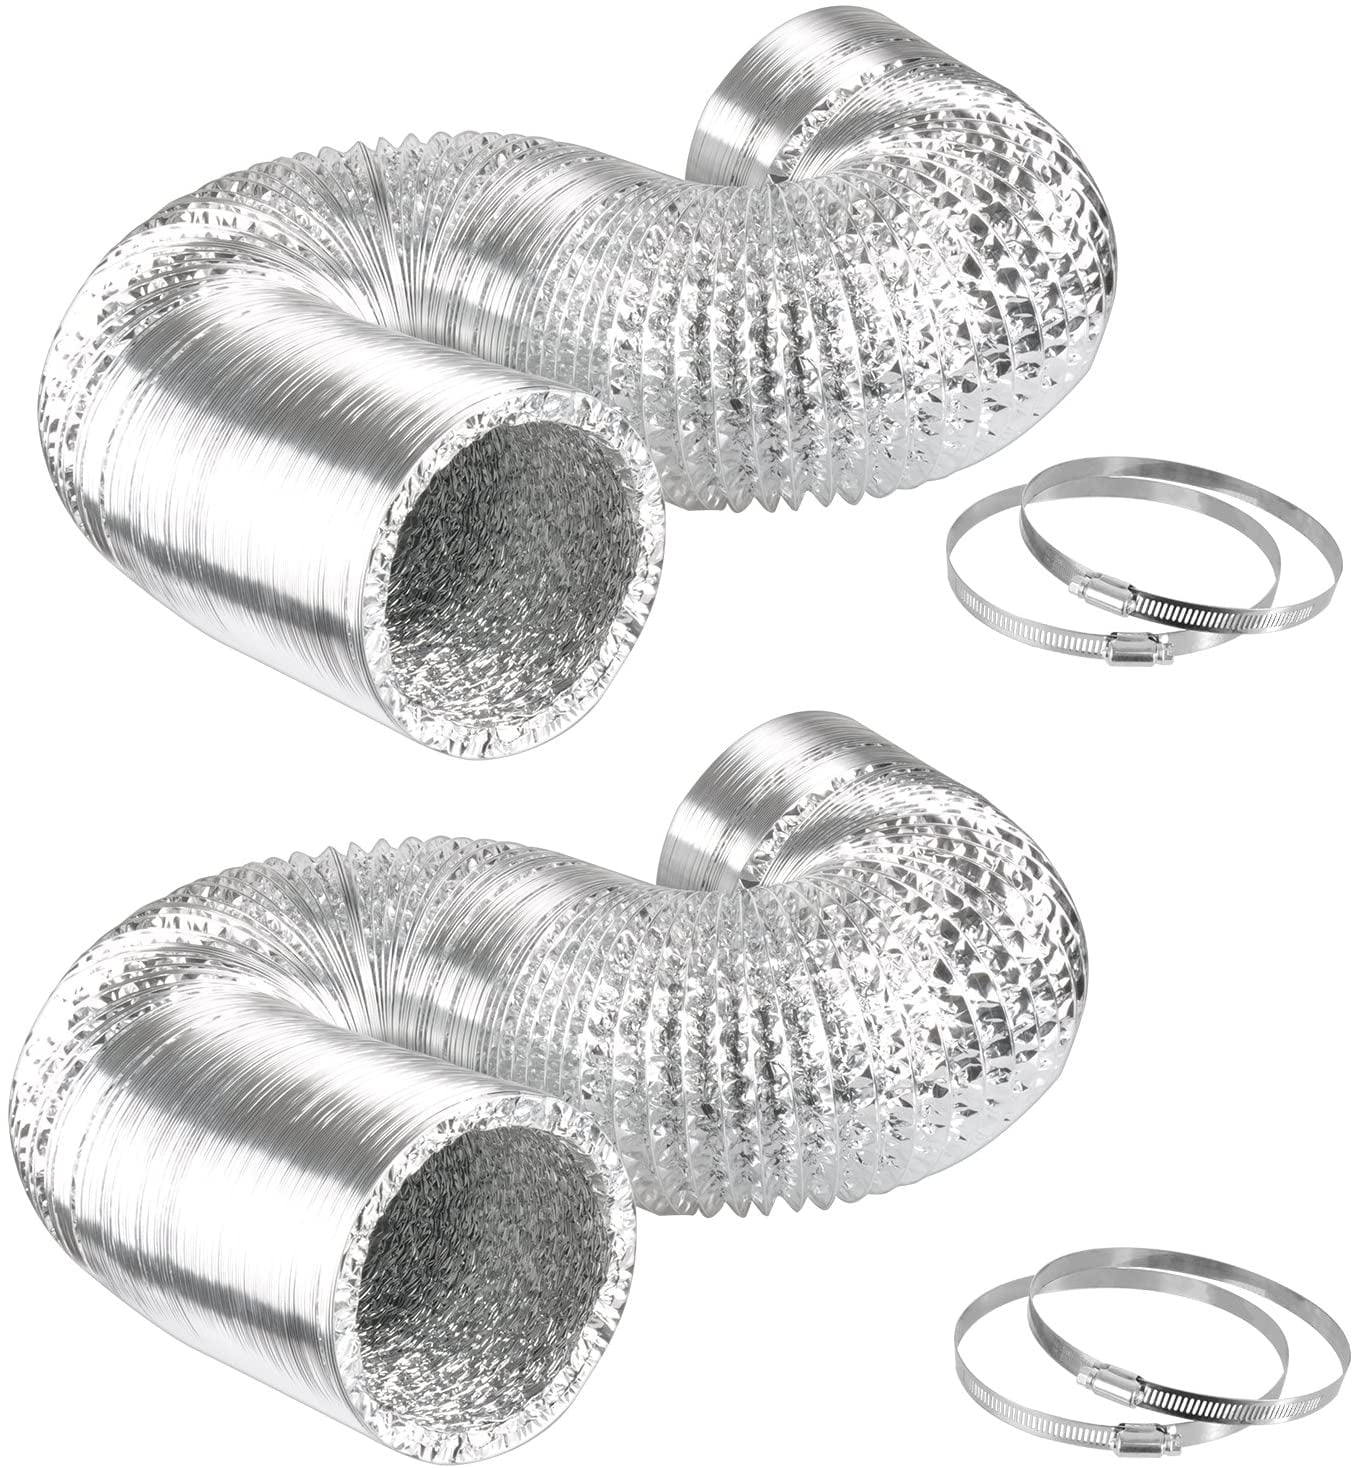 iPower GLDUCT12X25CX2 2 Pack Non-Insulated Flex Air Aluminum Dryer Vent Hose HVAC Ducting Silver 2-Pack 12 Inch 25 Feet 